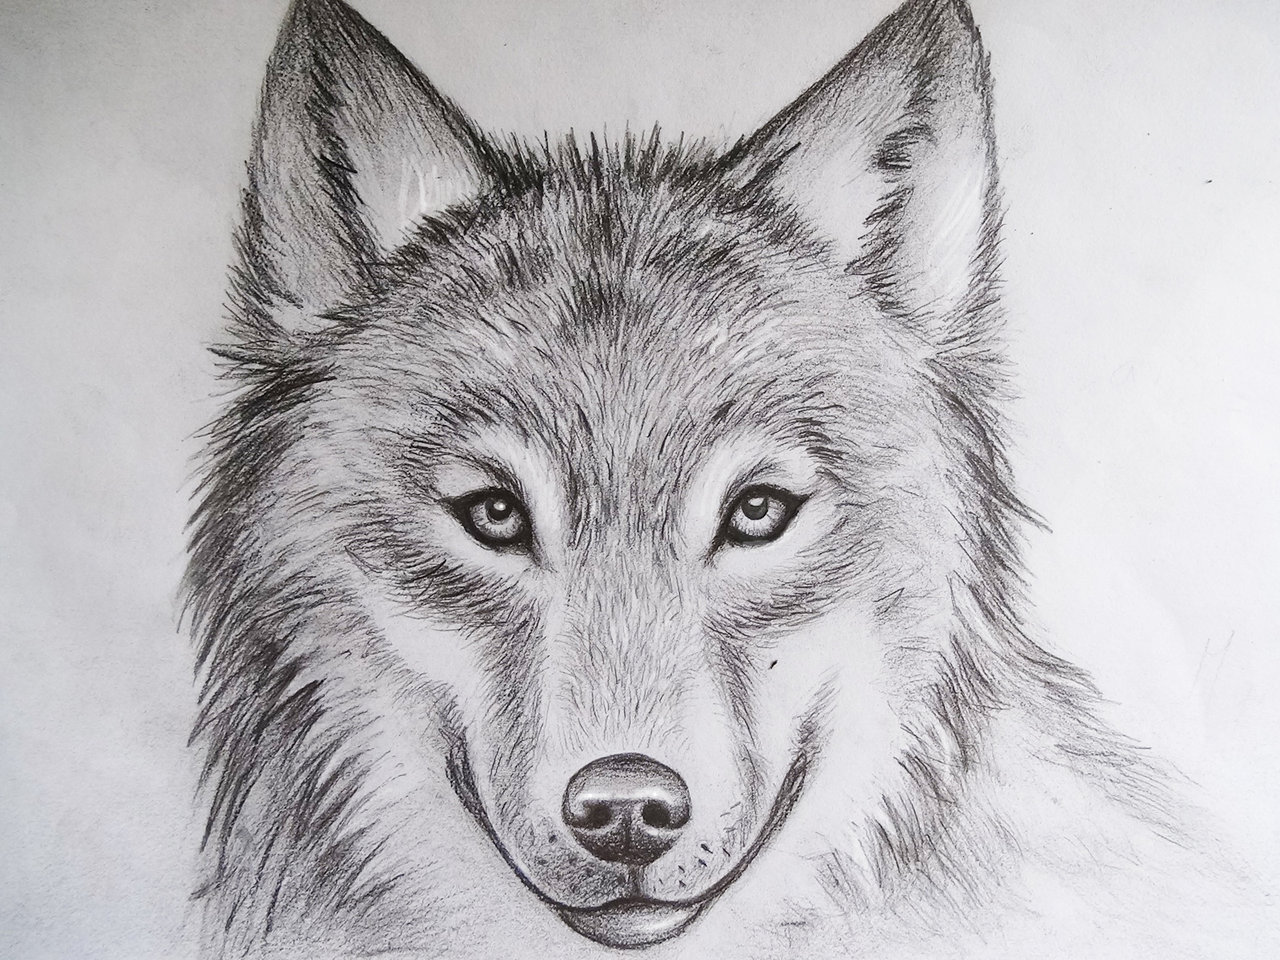 Free Wolves Drawings, Download Free Wolves Drawings png images, Free